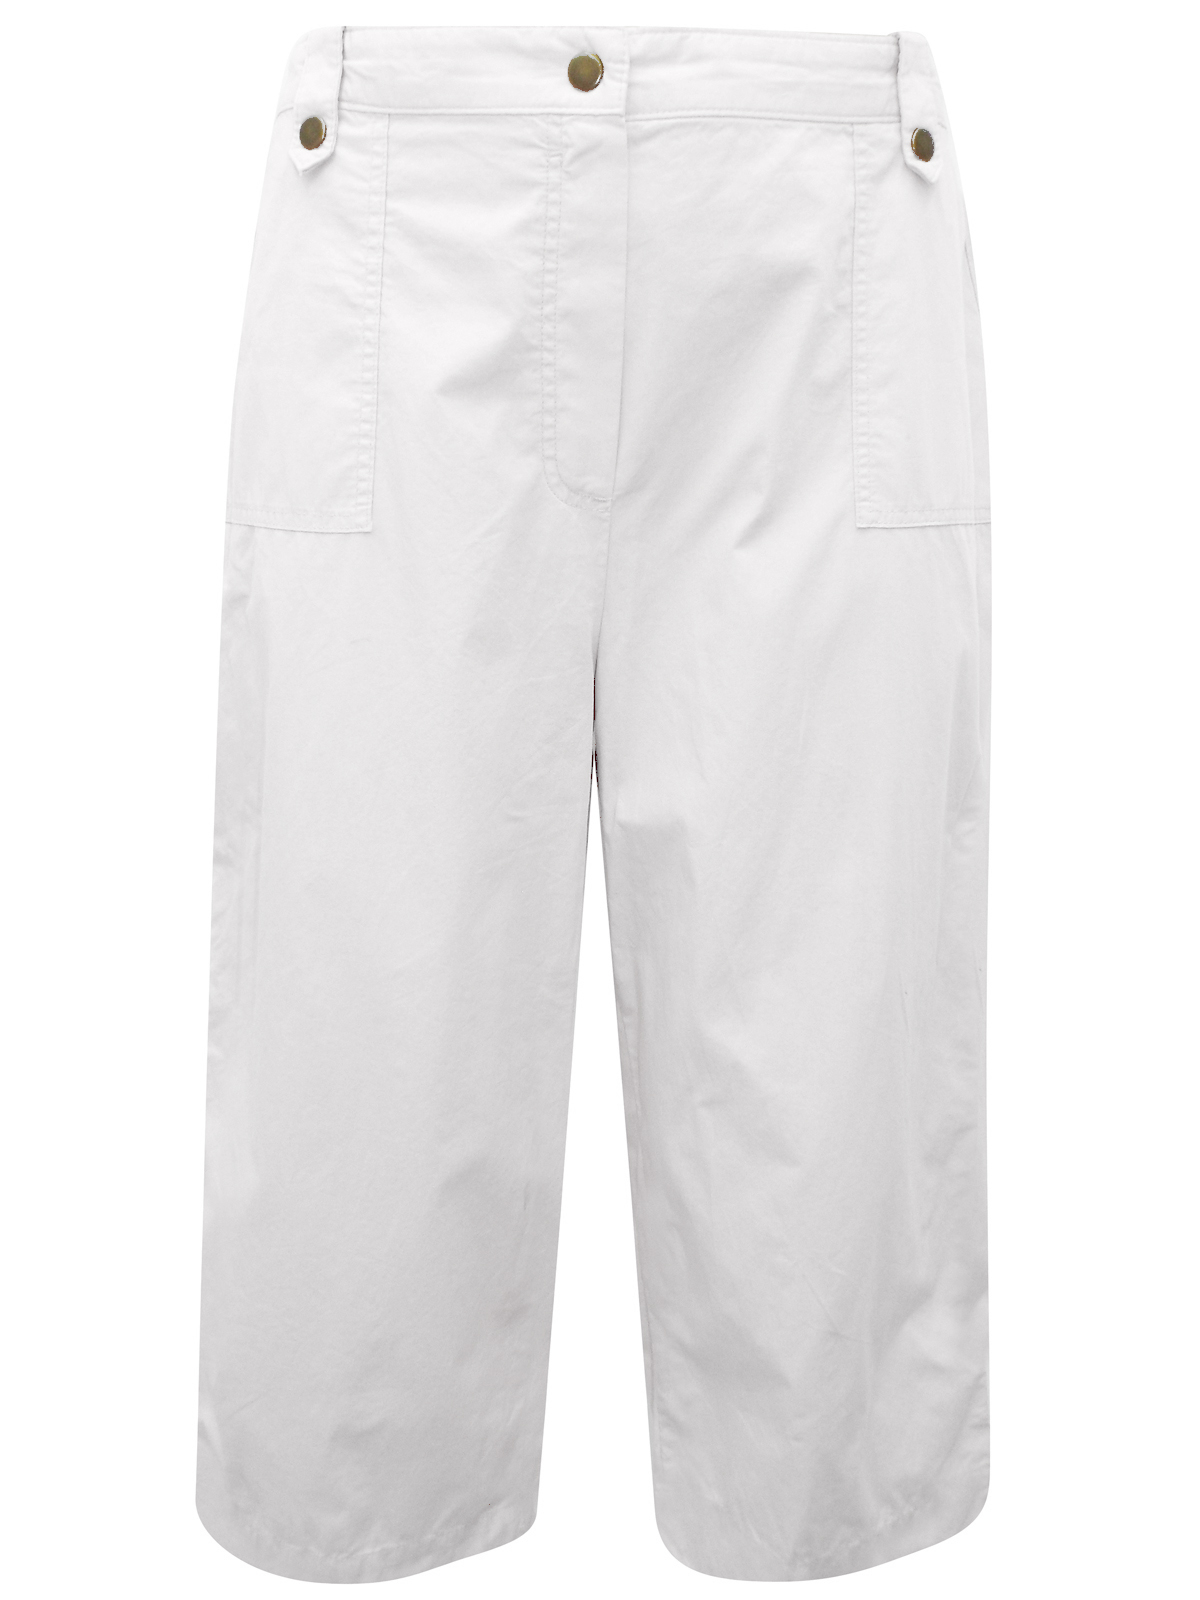 Marks and Spencer - - M&5 WHITE Pure Cotton Cropped Trousers - Size 18